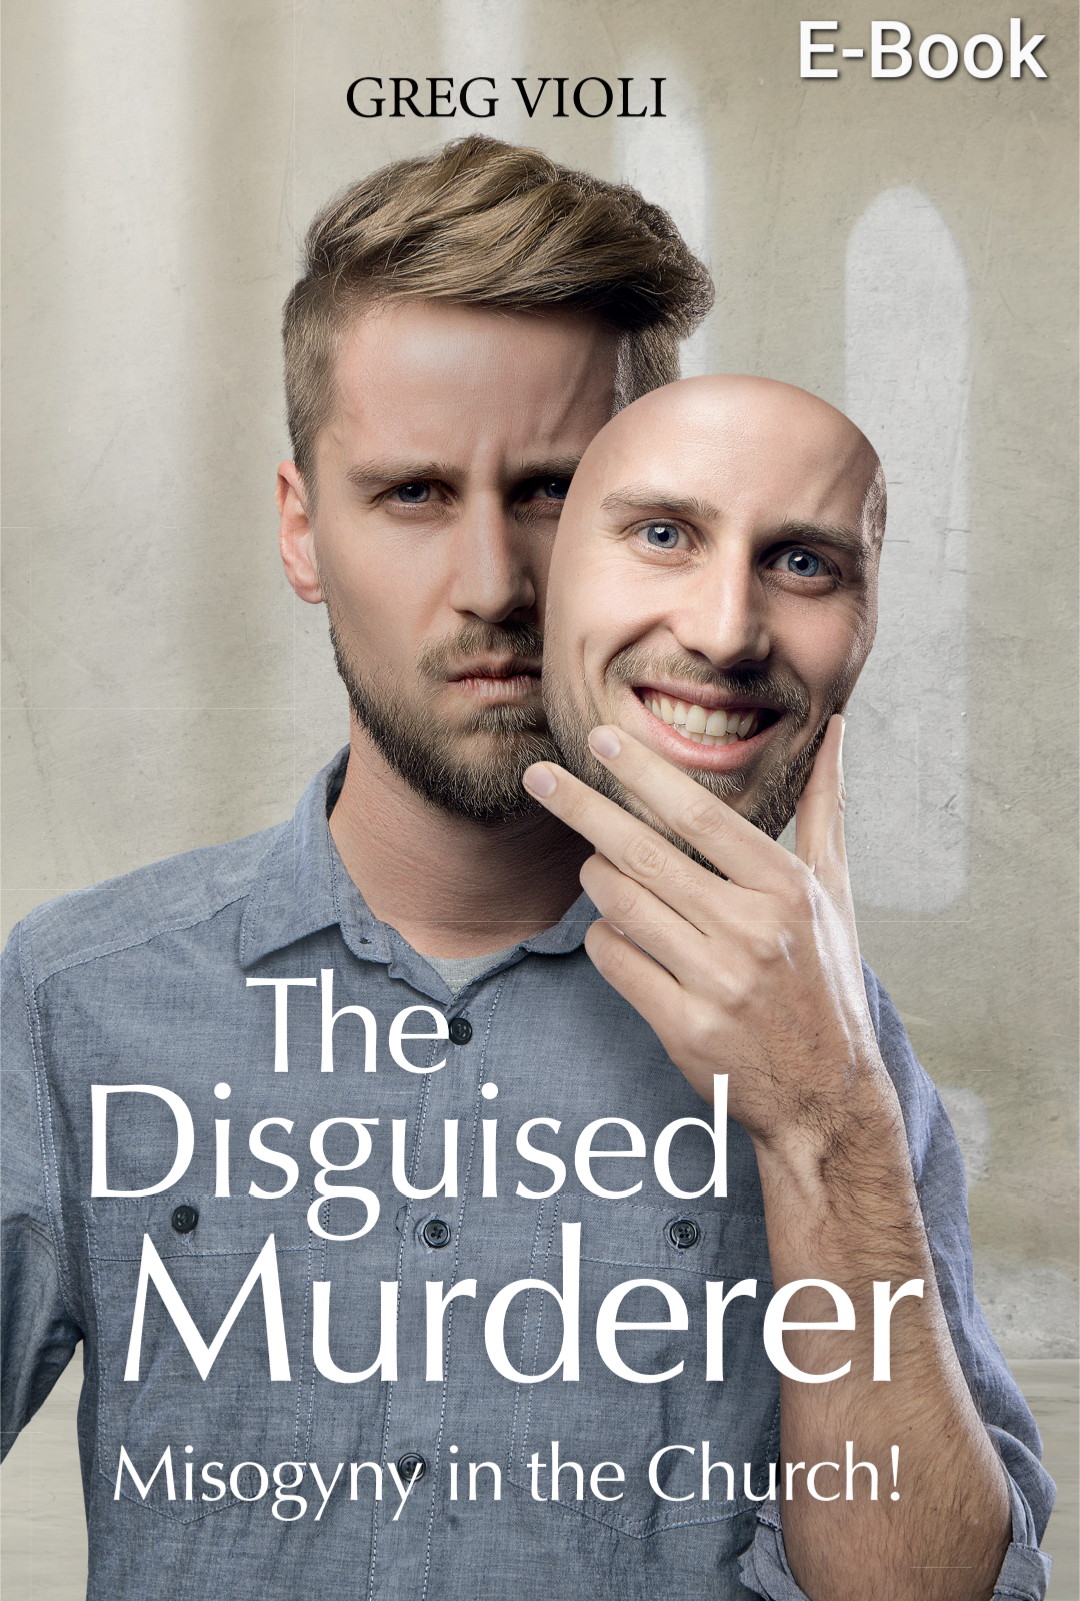 The Disguised Murderer: Misogyny in the Church! eBOOK